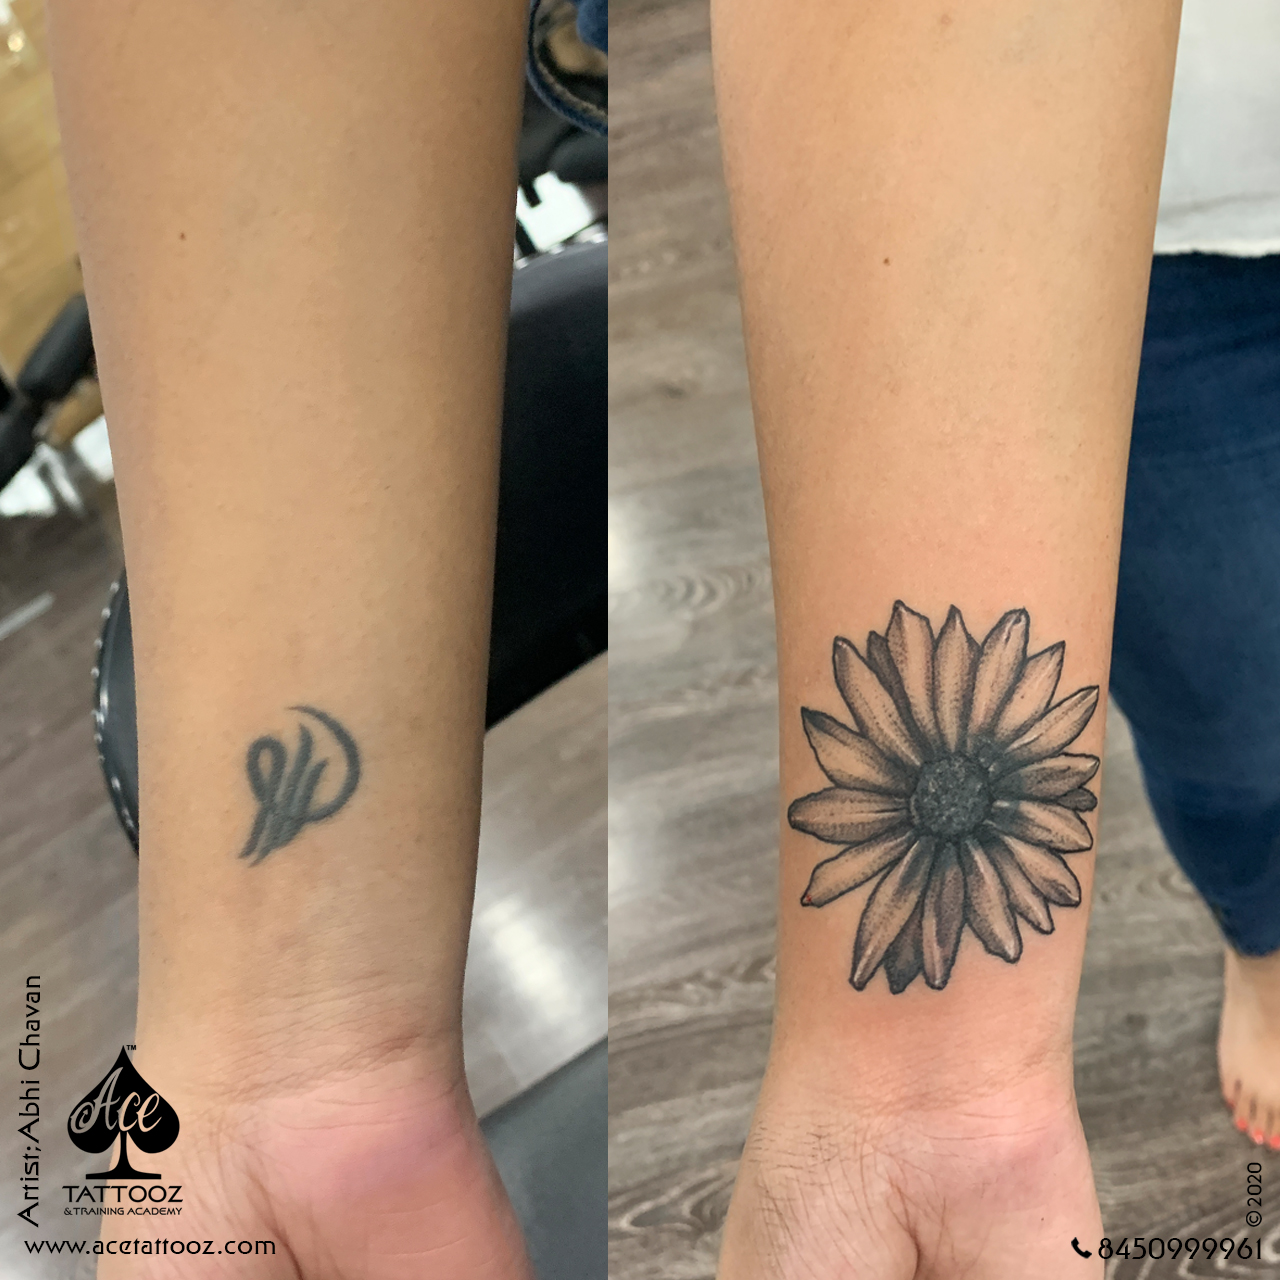 Tattoo of Lotus Flowers Cover Up